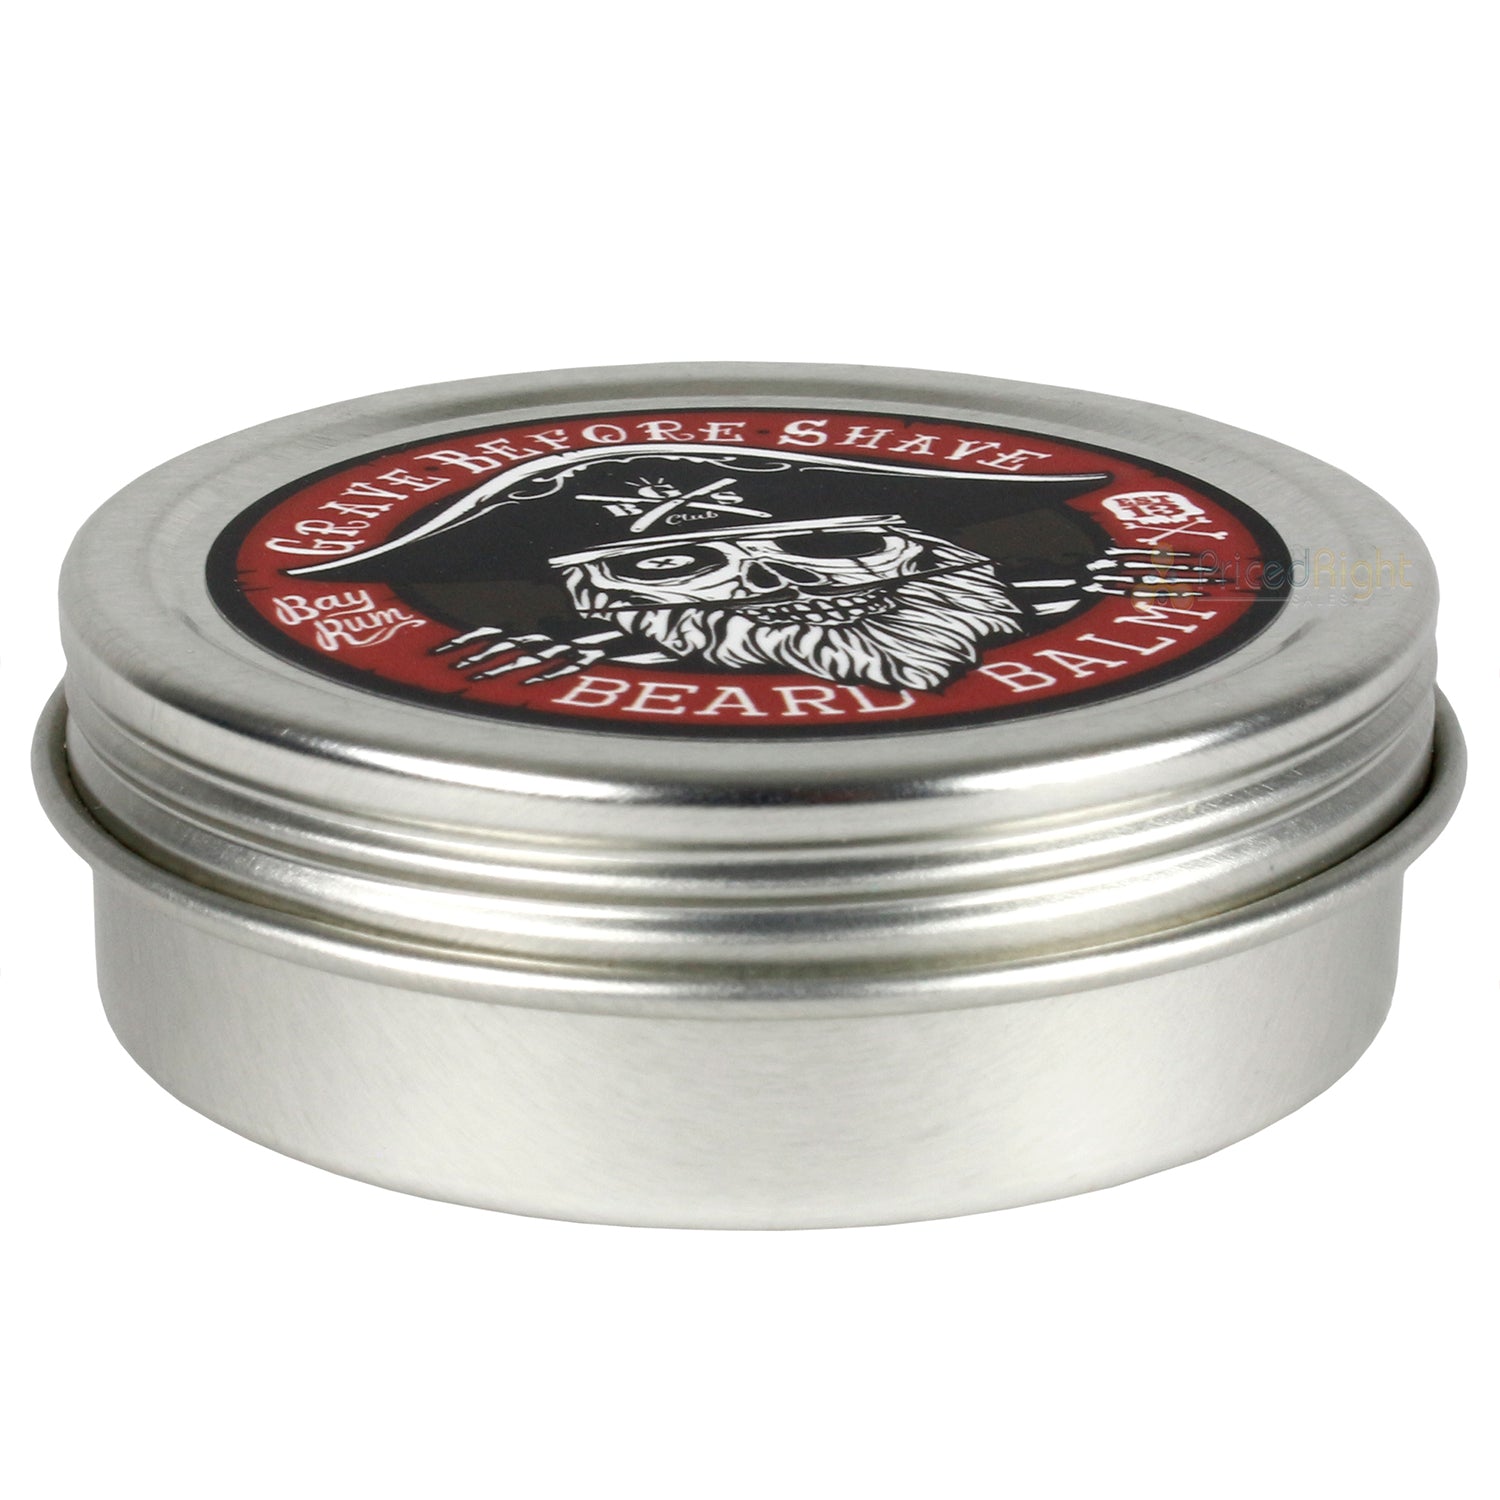 Grave Before Shave Handcrafted Beard Balm Bay Rum Blend Strong Hold 2 Ounce